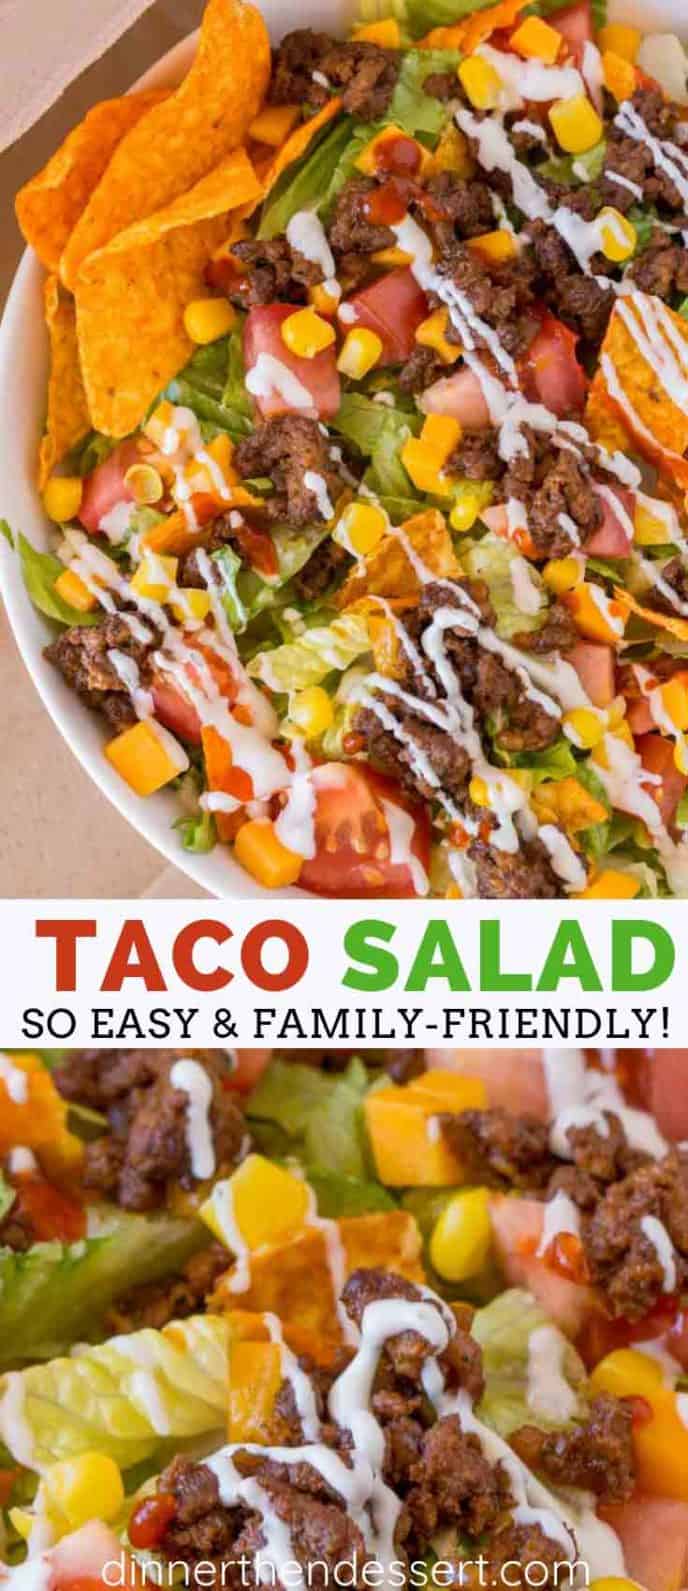 Taco Salad with ground beef, corn, tomatoes, and salsa